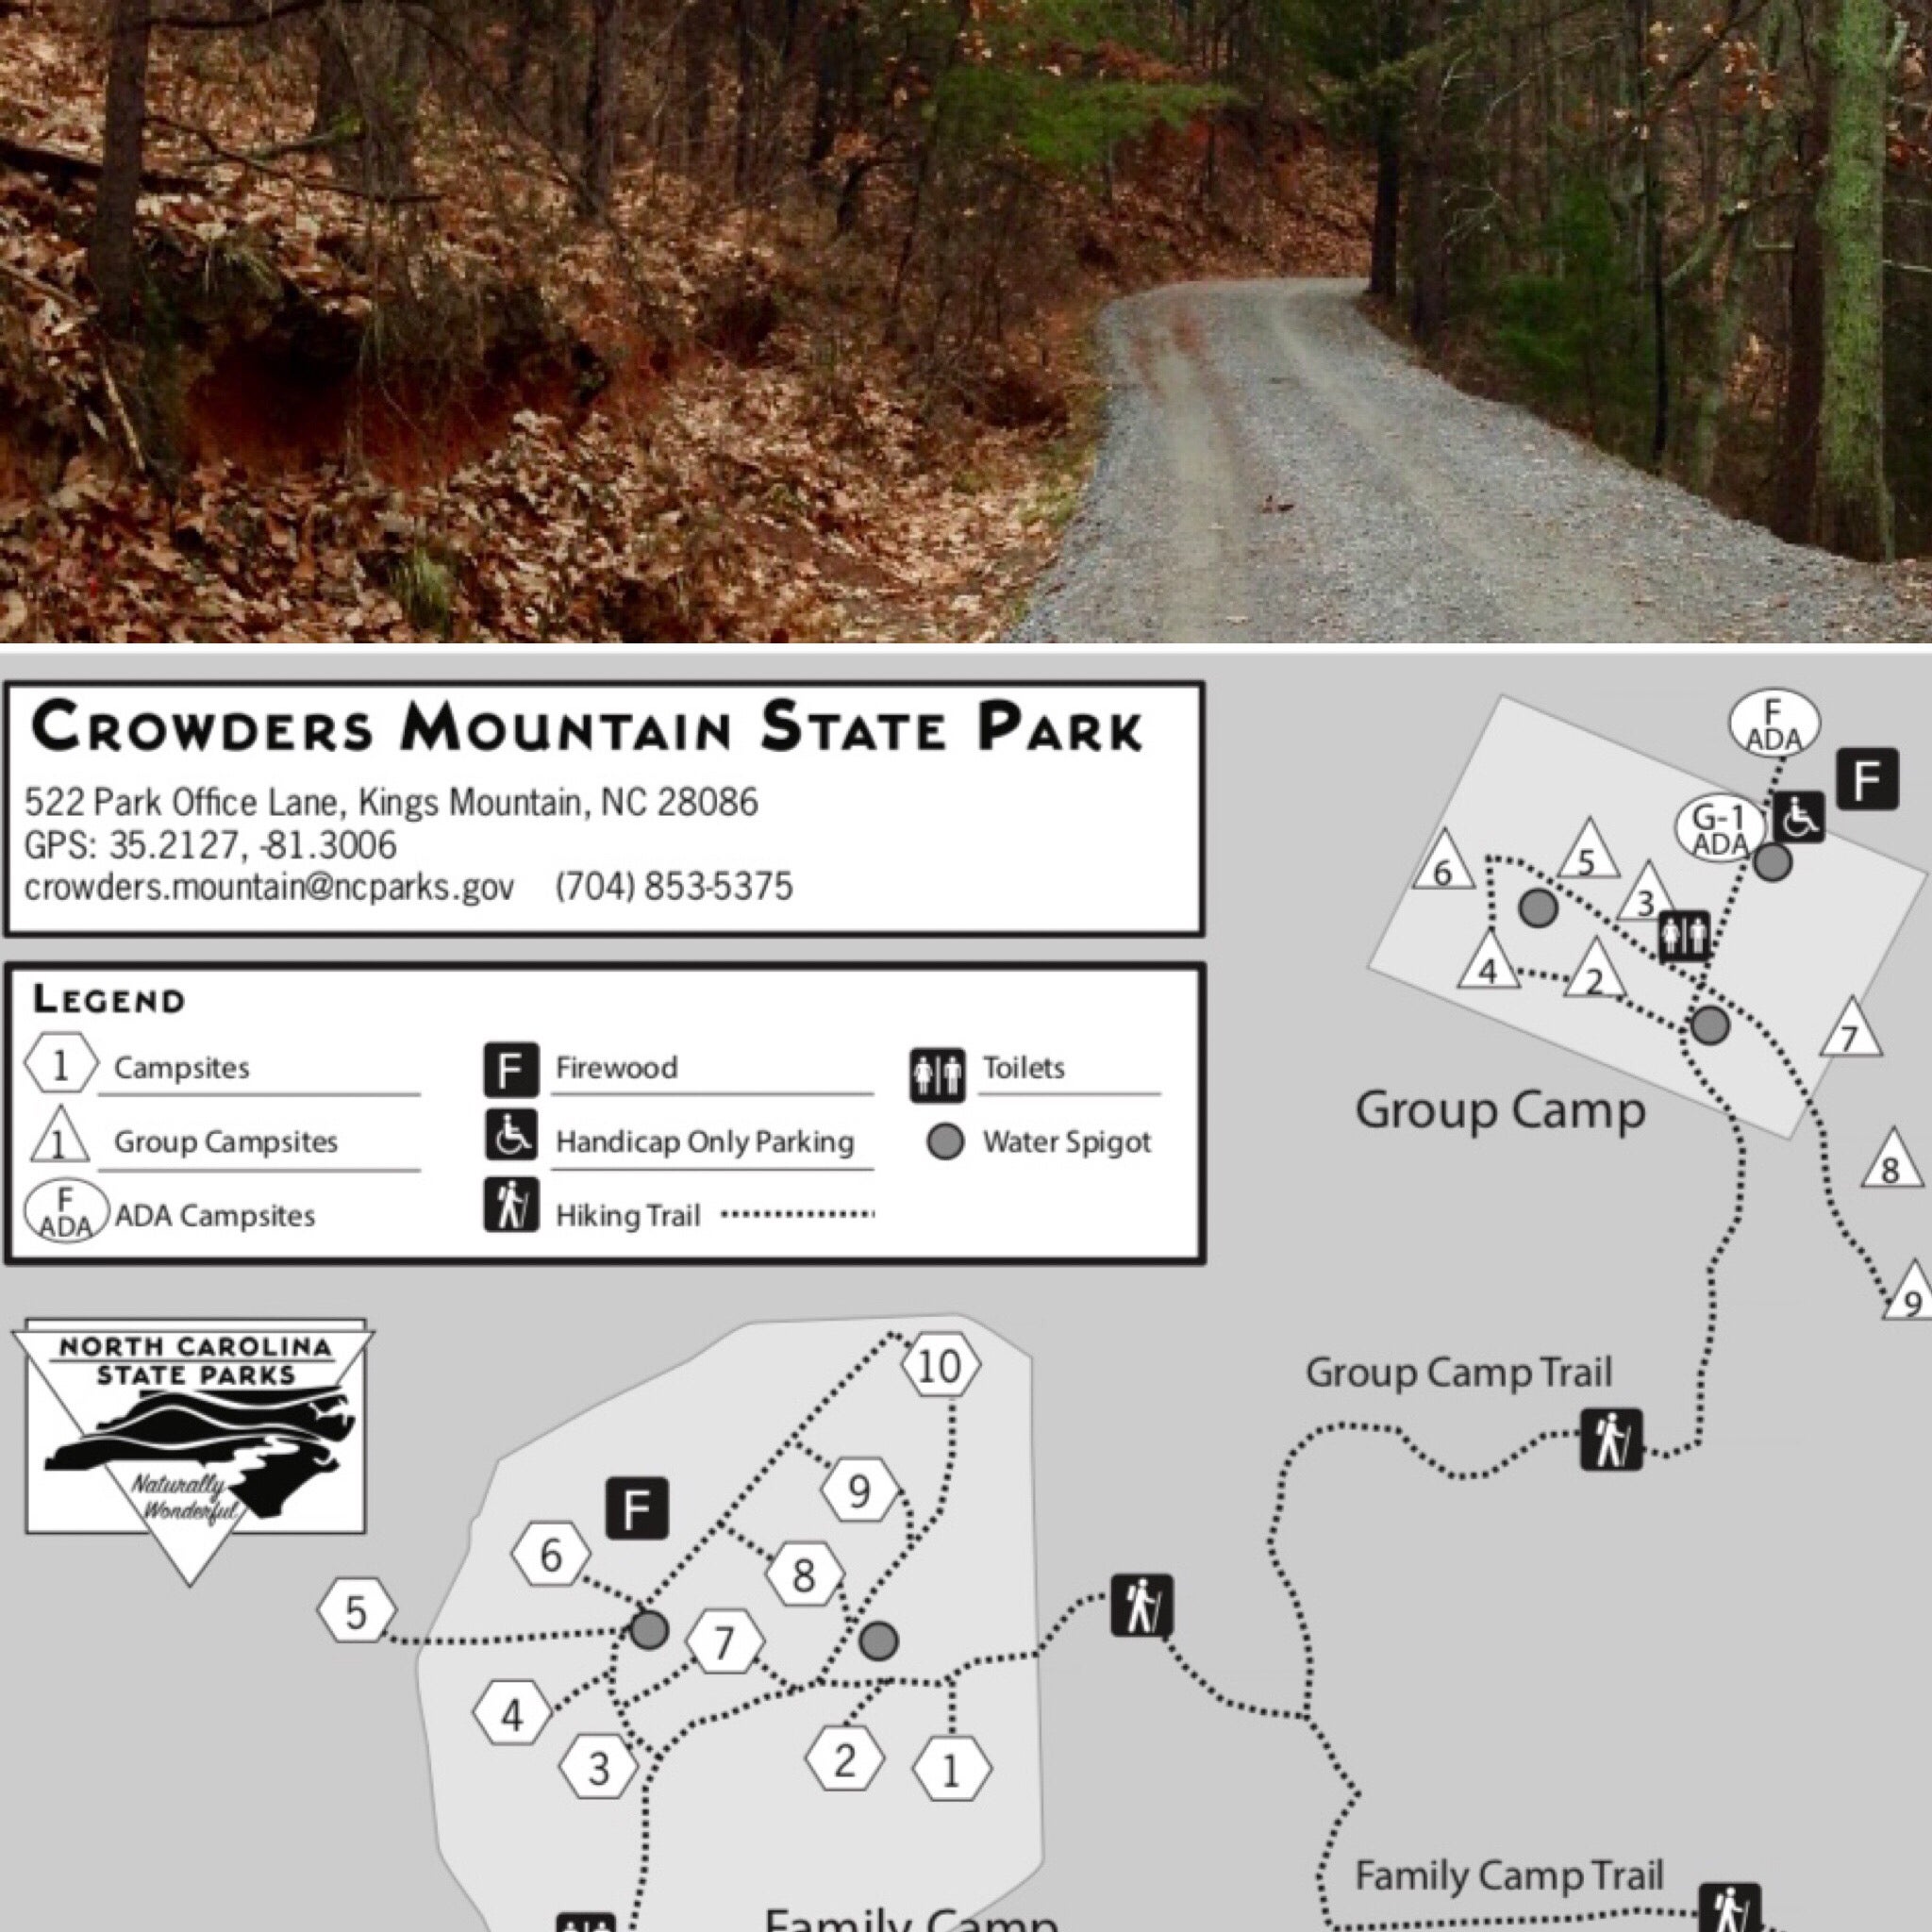 All campsites are hike-i, but note that there are a couple ADA sites in the group camp and you can get permission to drive up to the campground area to access them